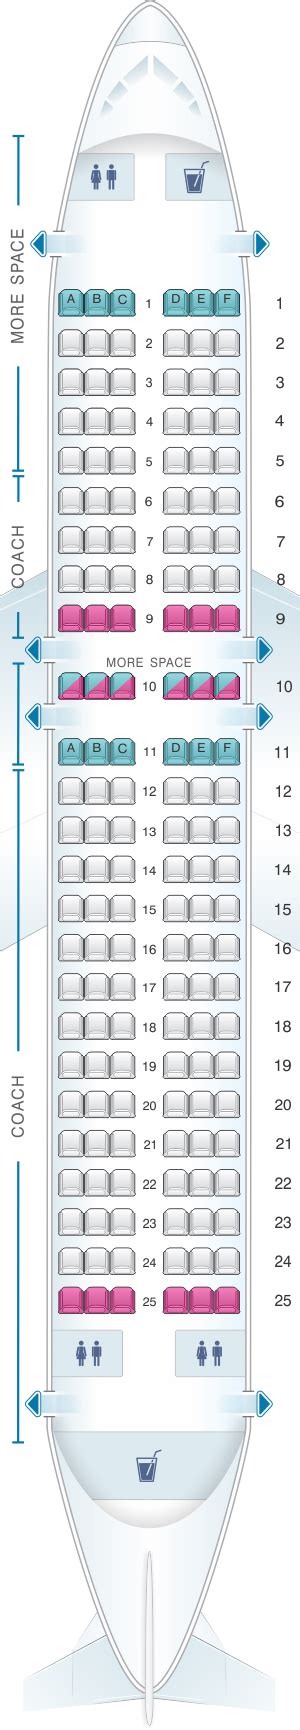 Jetblue plane seat layout. Flight Details: JetBlue Airways Flight 624 Los Angeles (LAX) to New York (JFK) Cabin: Even More Space Aircraft: Airbus A321 Seat: 9C. Getting the Even More Space Seats at Online Check-In: At booking, starting prices for the Even More Space (rows 6-10 and exit rows 18-19) cost $130 for a middle seat and $134 for a window or aisle. 